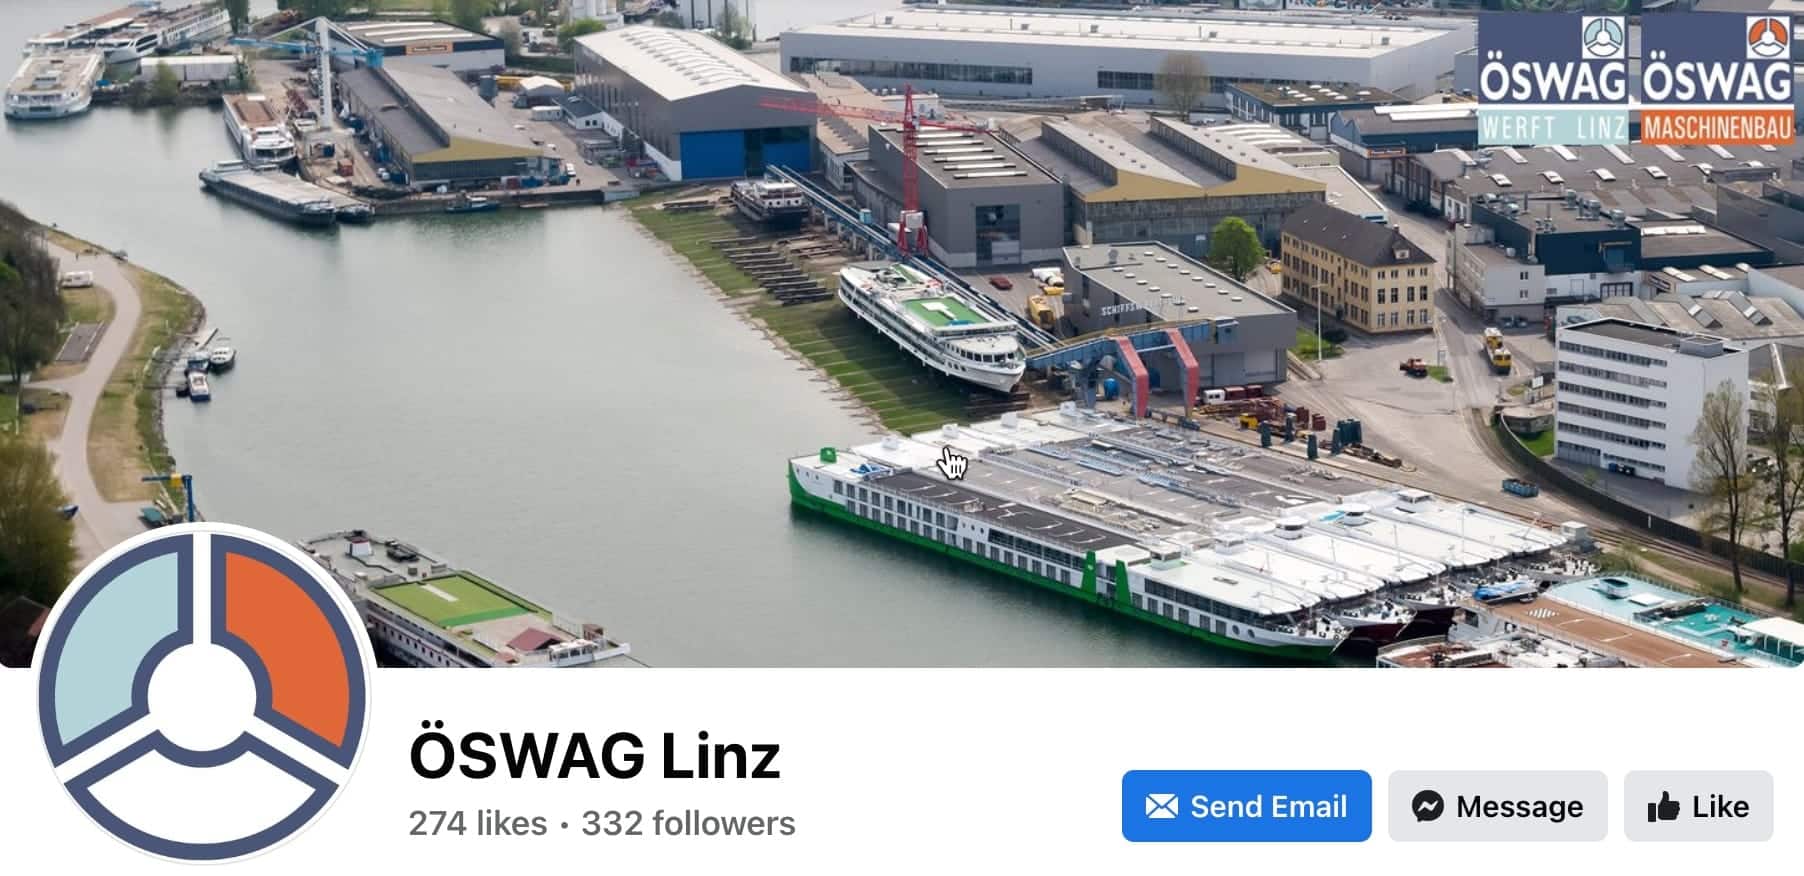 oeswag facebookpage